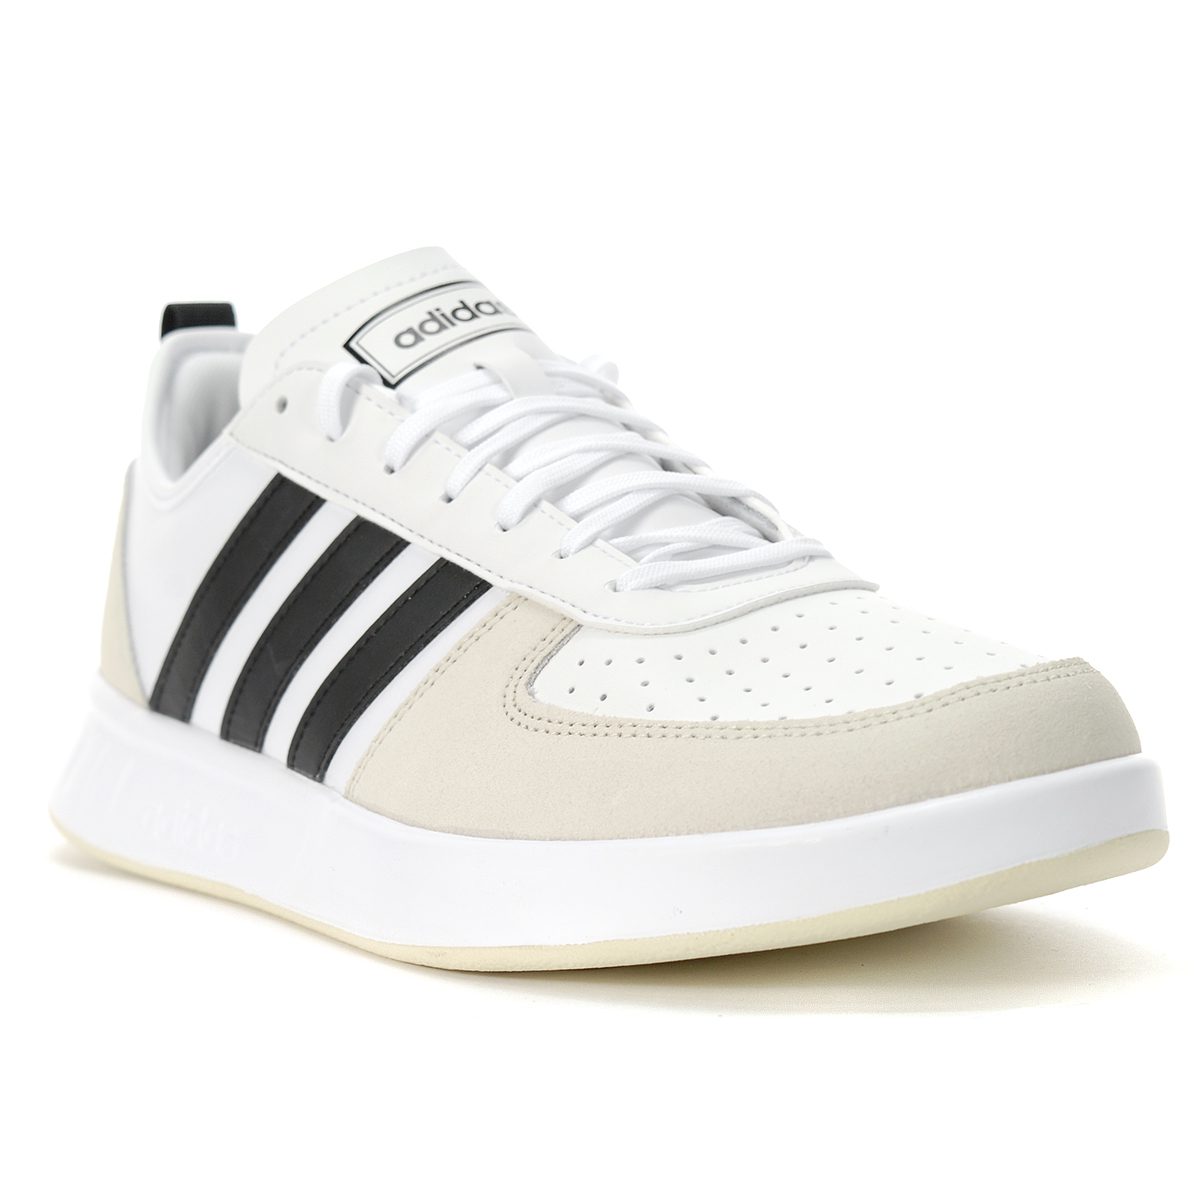 Adidas Men's Court 80s Cloud White/Core Black/Raw White Sneakers EE9663 ...